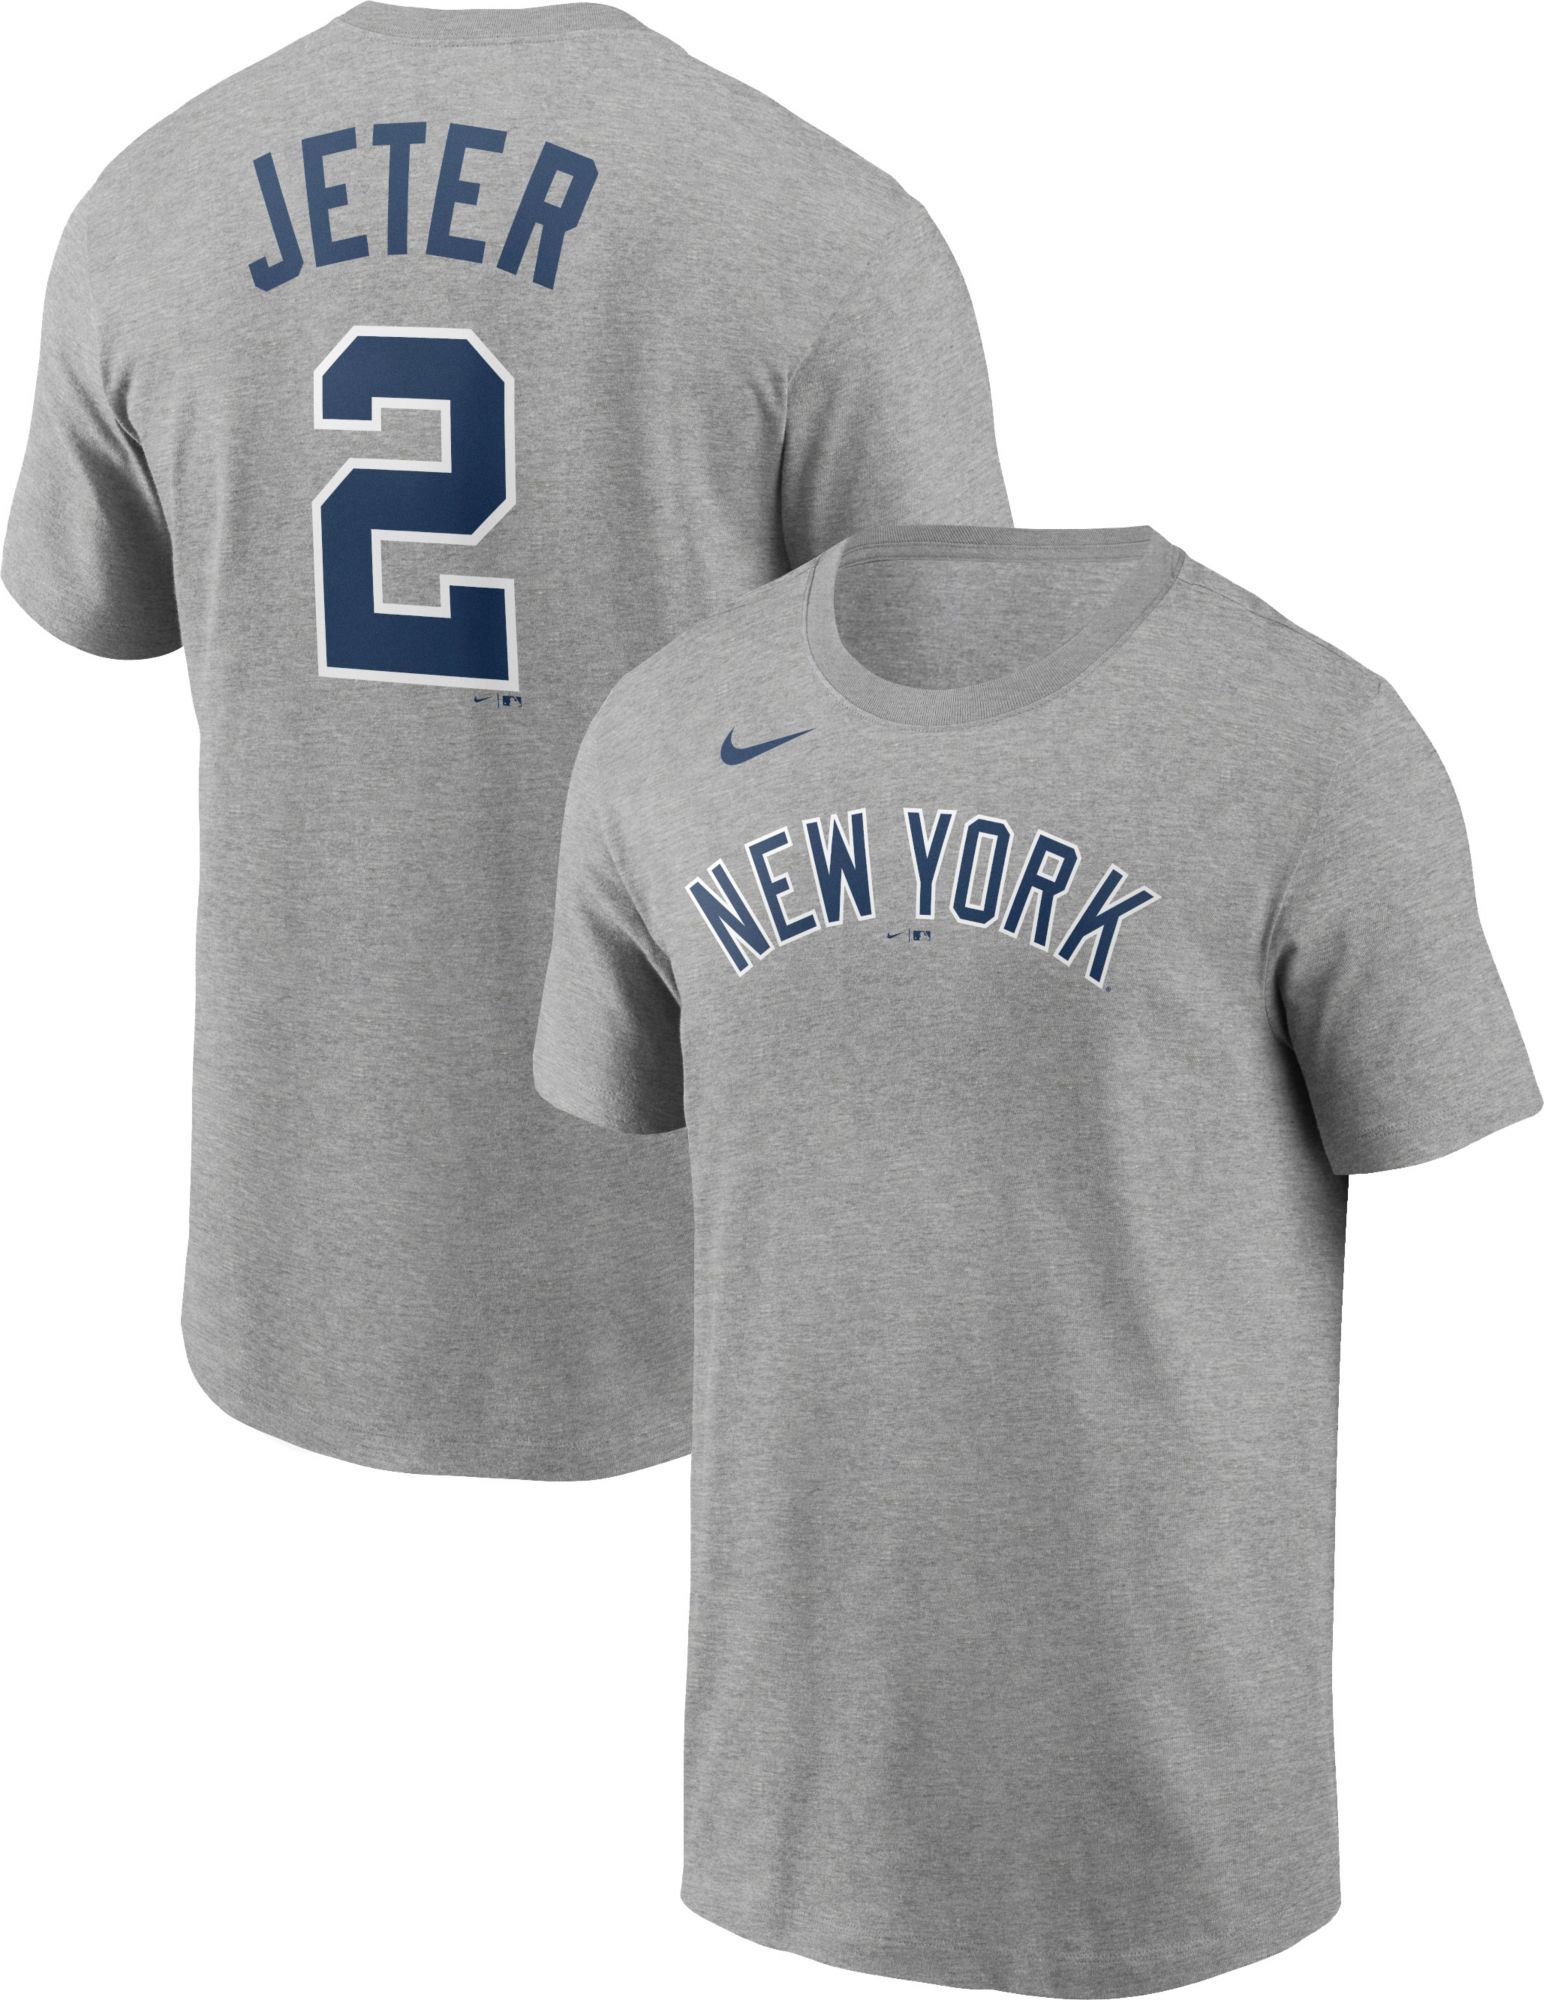 Best Aaron Judge 99 t shirts – Jersey number 99, funny Tees-TH